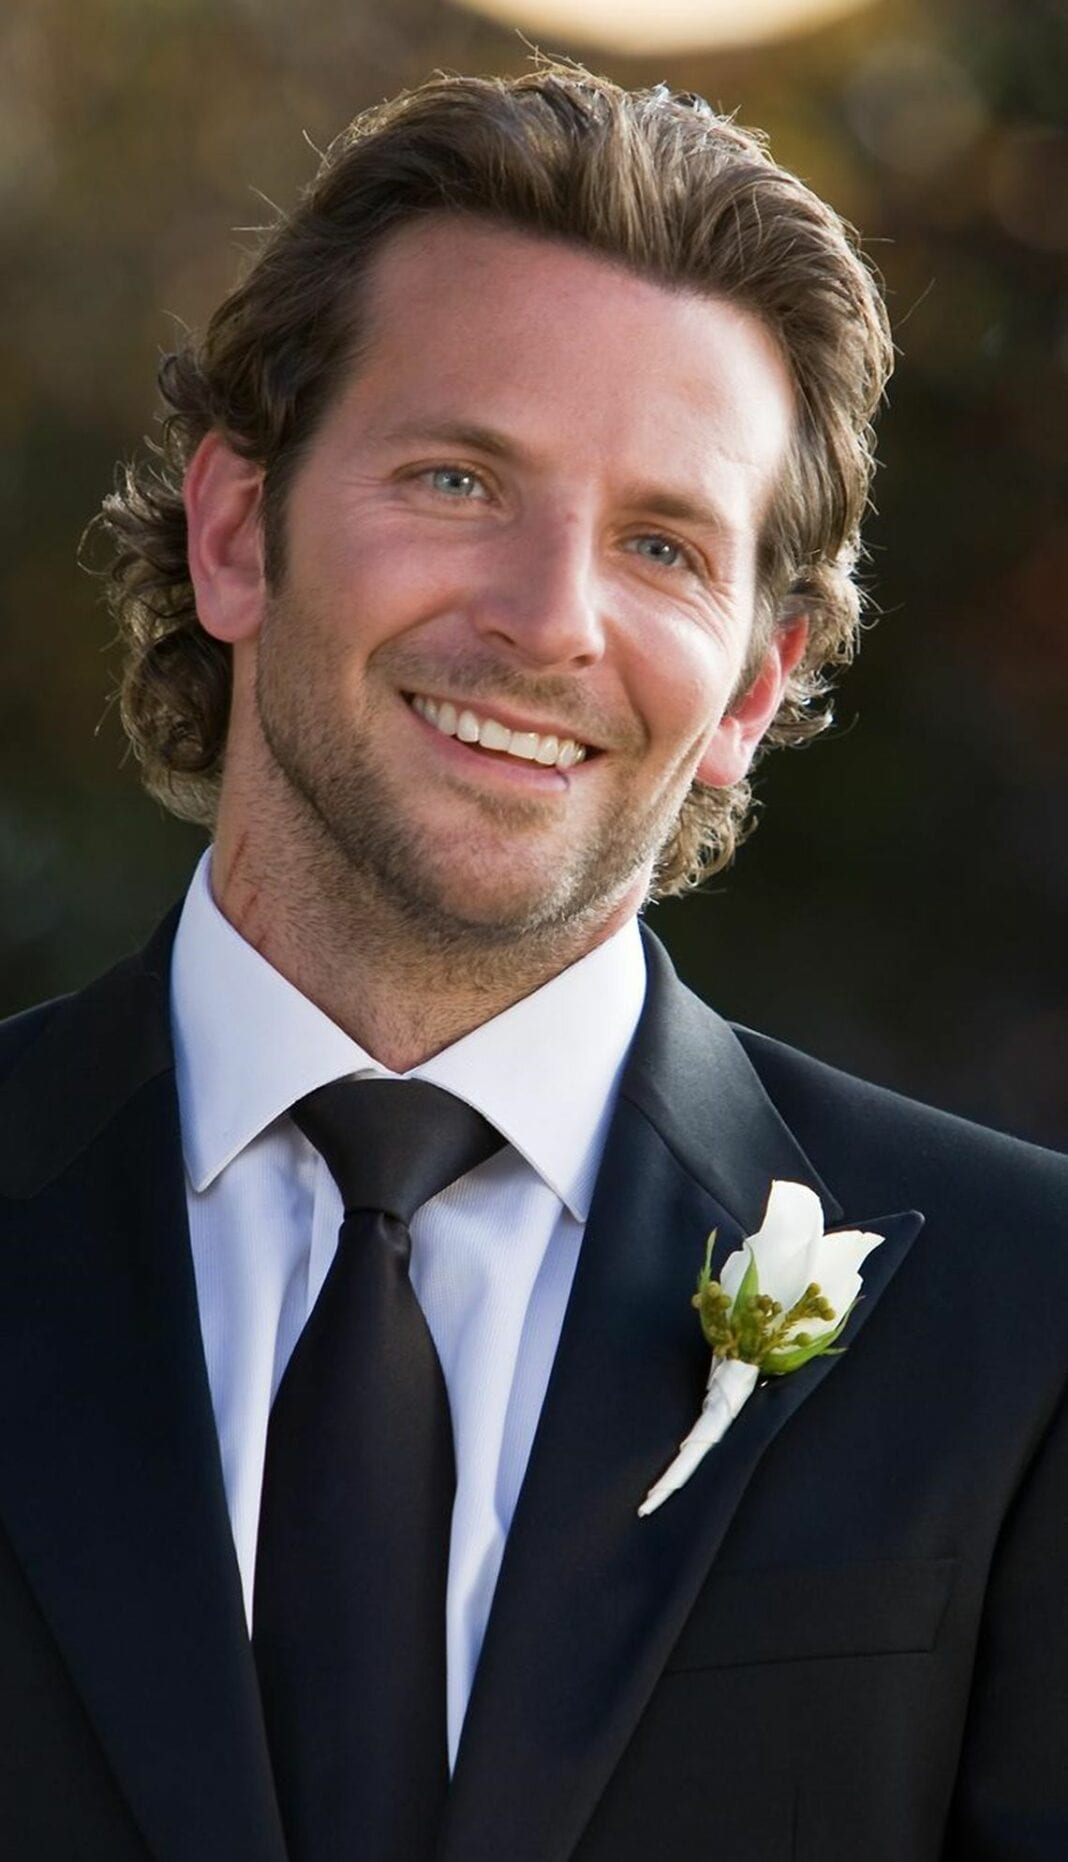 21 Stylish Wedding Hairstyles for Men - Hottest Haircuts